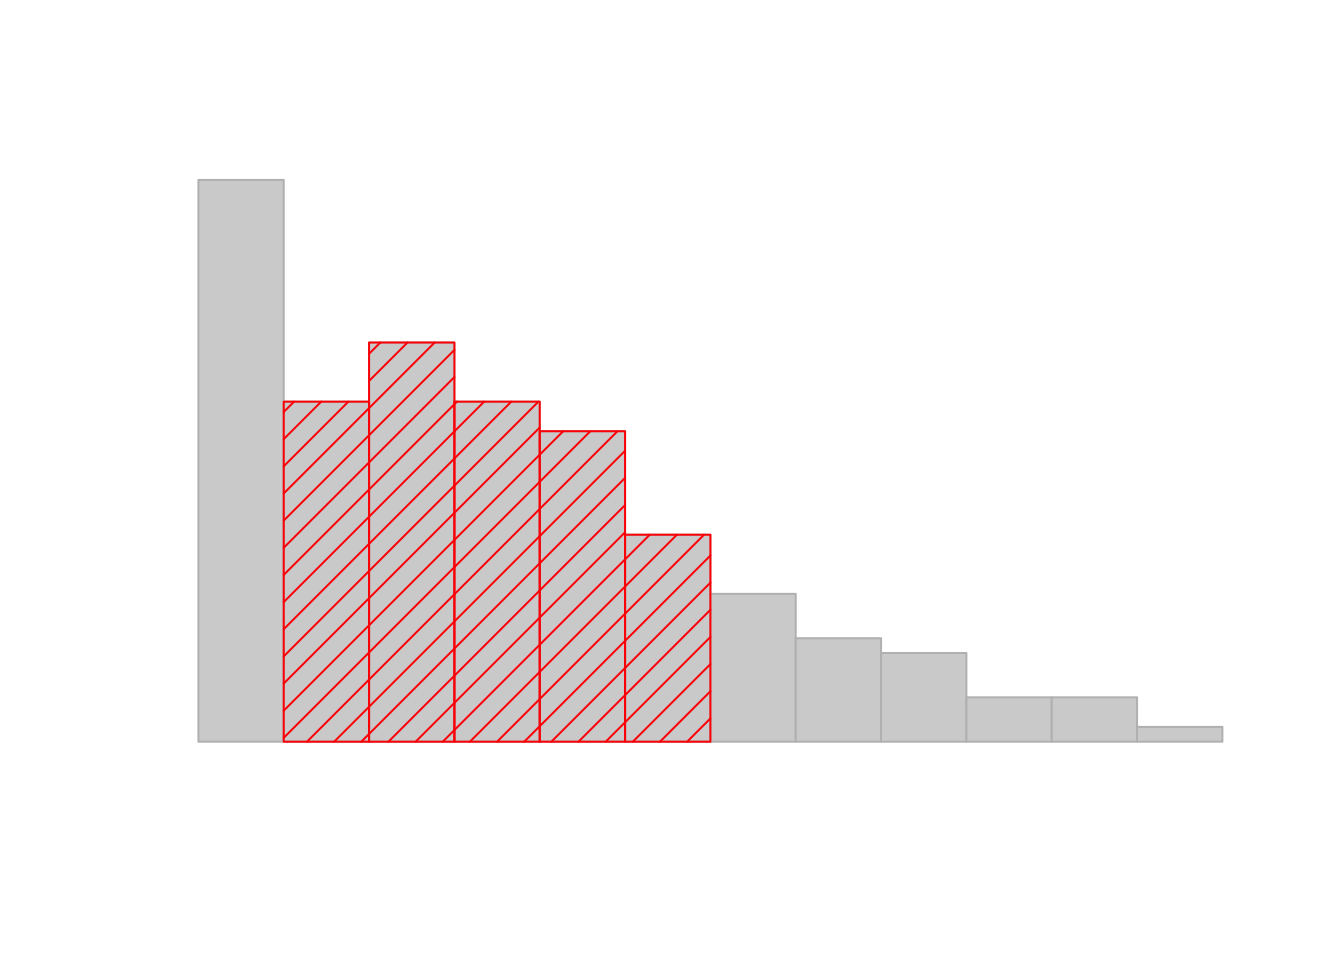 An illustration of the standard deviation, applied to the AFL winning margins data. The shaded bars in the histogram show how much of the data fall within one standard deviation of the mean. In this case, 65.3% of the data set lies within this range, which is pretty consistent with the "approximately 68% rule" discussed in the main text.